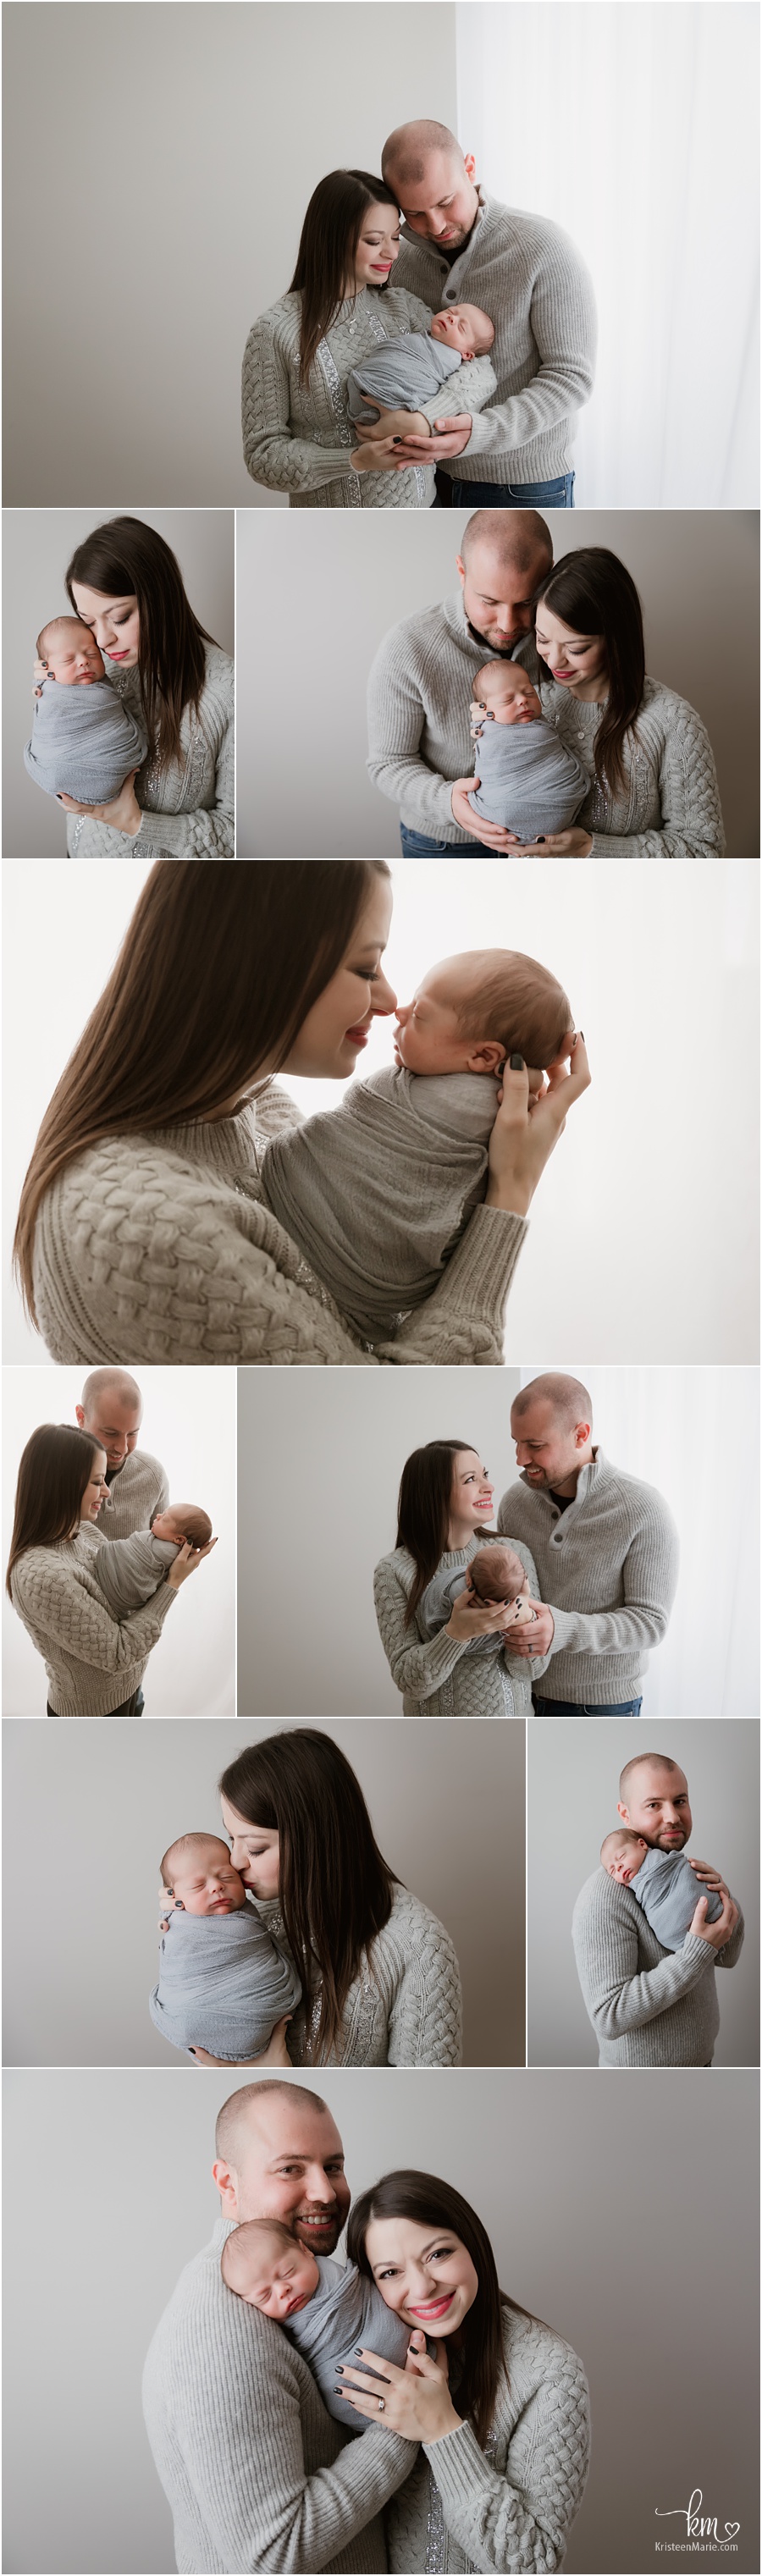 family poses with newborn baby - Indianapolis newborn photography - family of 3